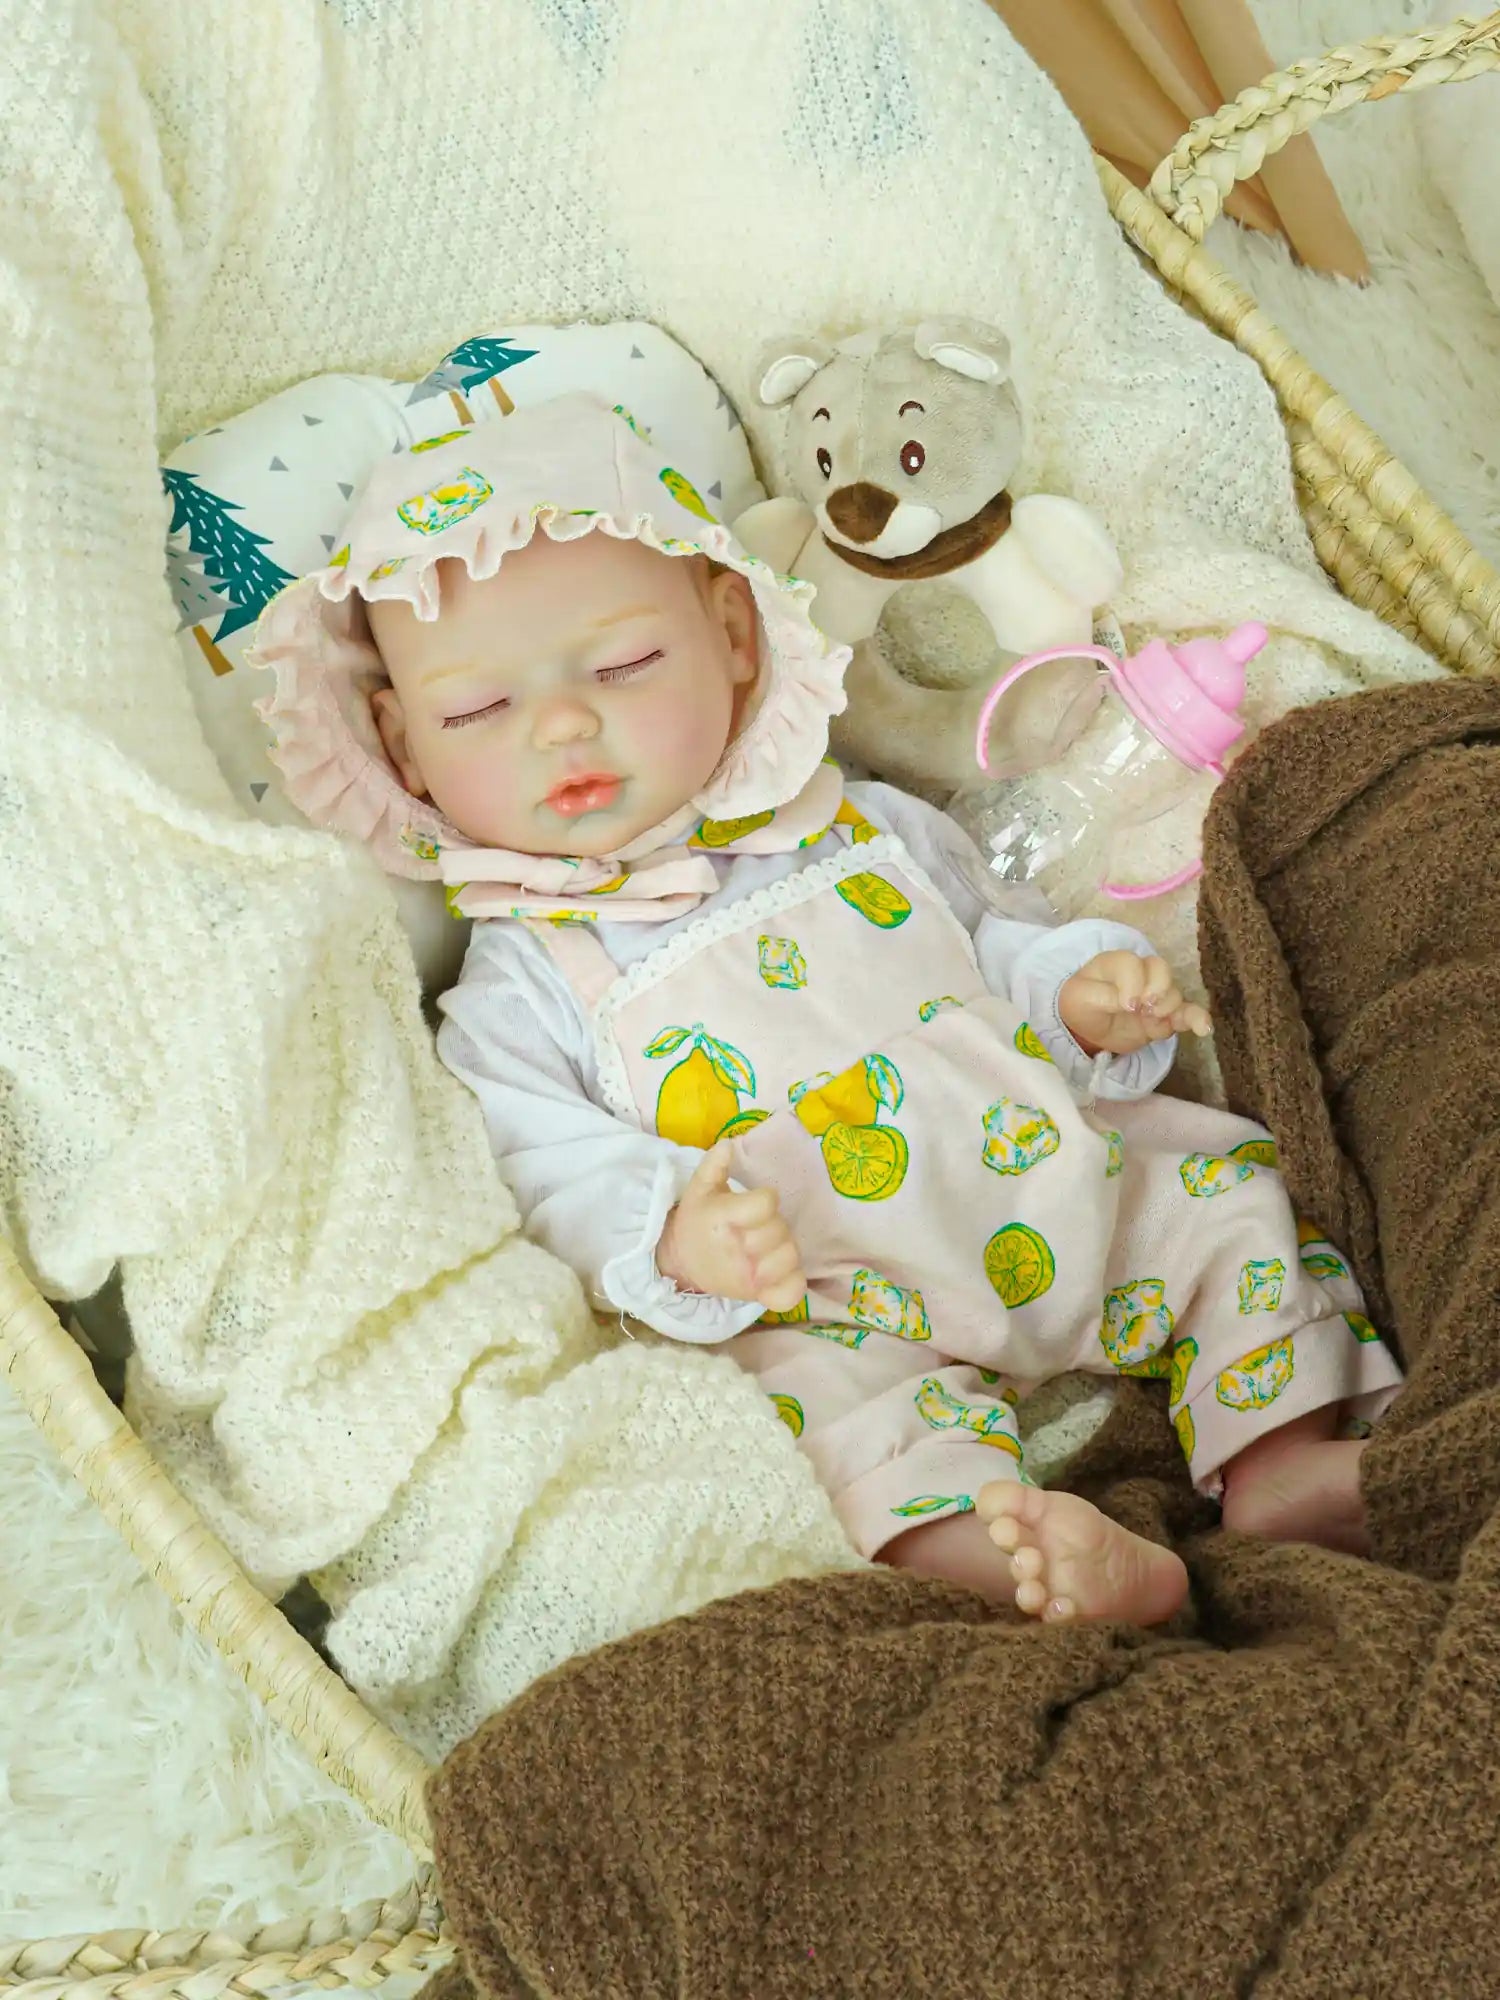 A serene reborn baby doll adorned in a pink outfit with lemon patterns and a matching bonnet, lying in a basket filled with soft blankets. The scene is completed with a plush teddy bear and a baby bottle, evoking a nurturing environment.